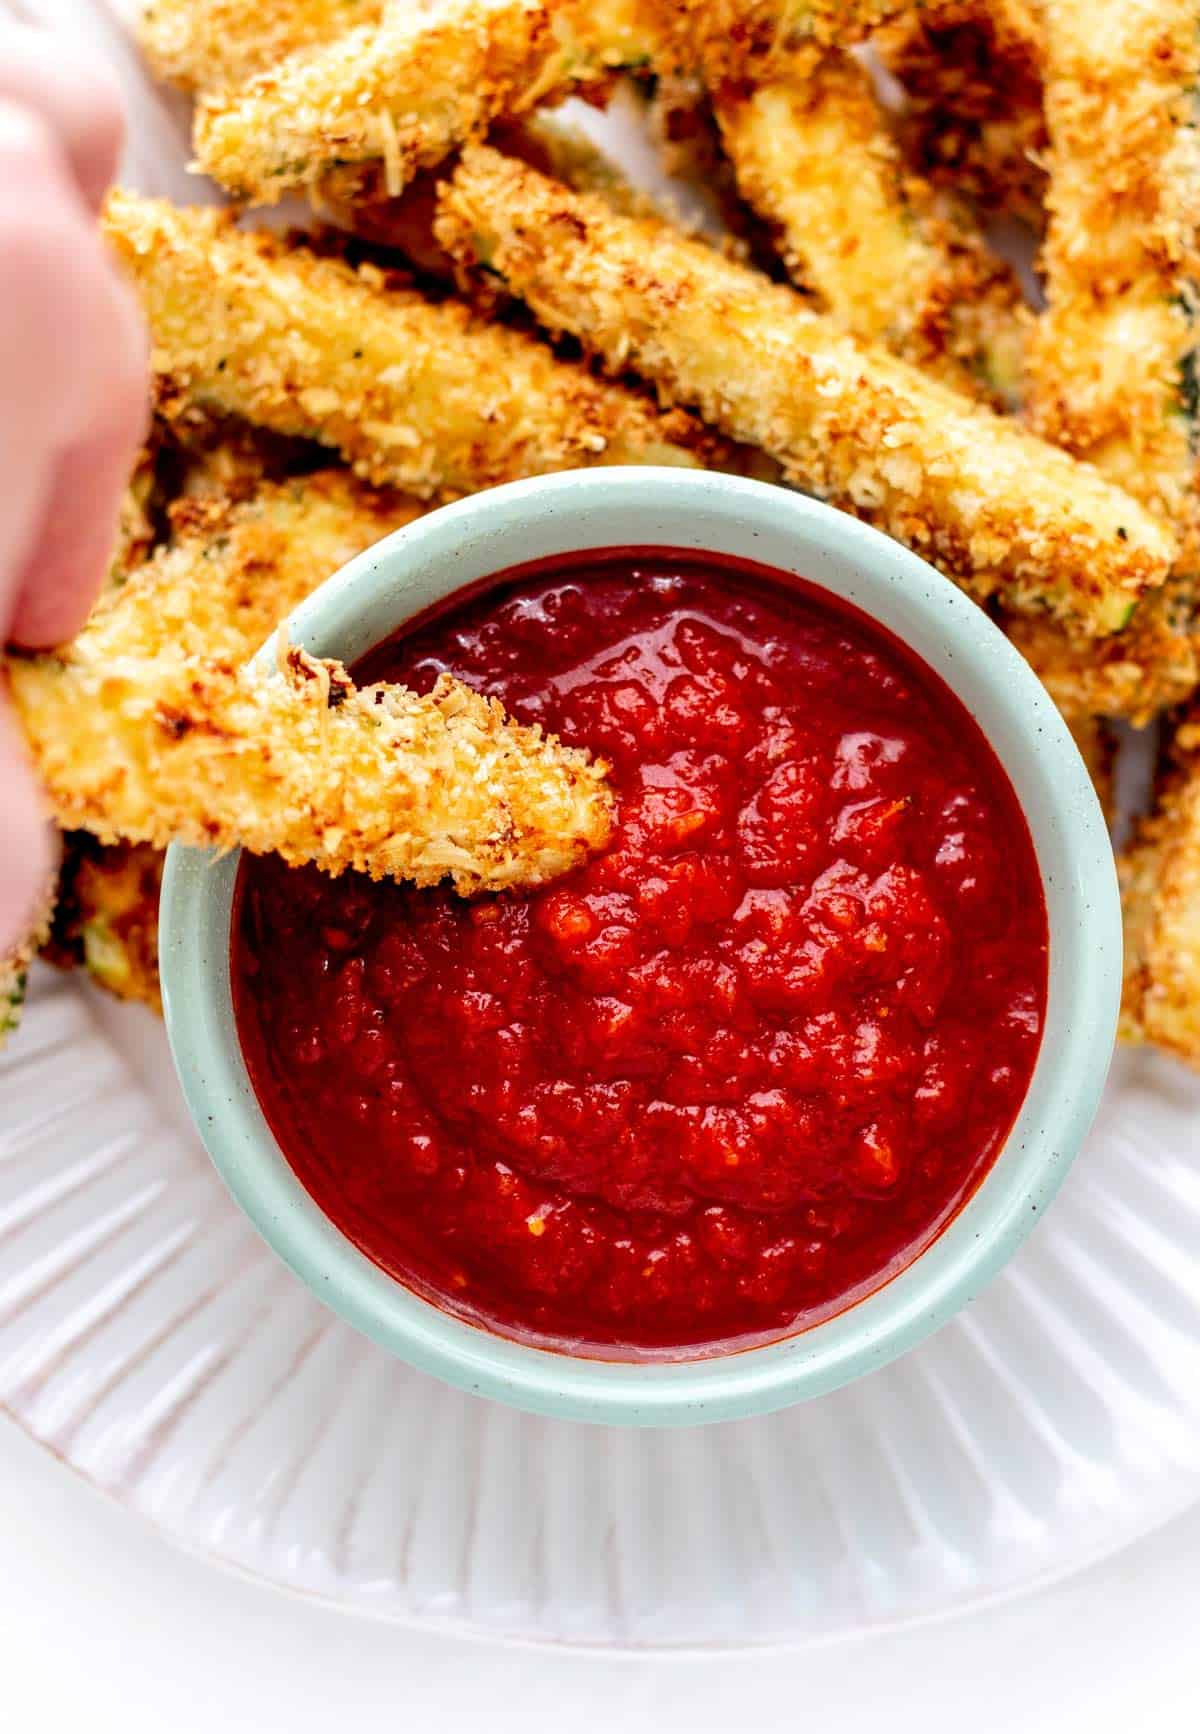 A hand dipping a zucchini fry into a bowl of marinara.